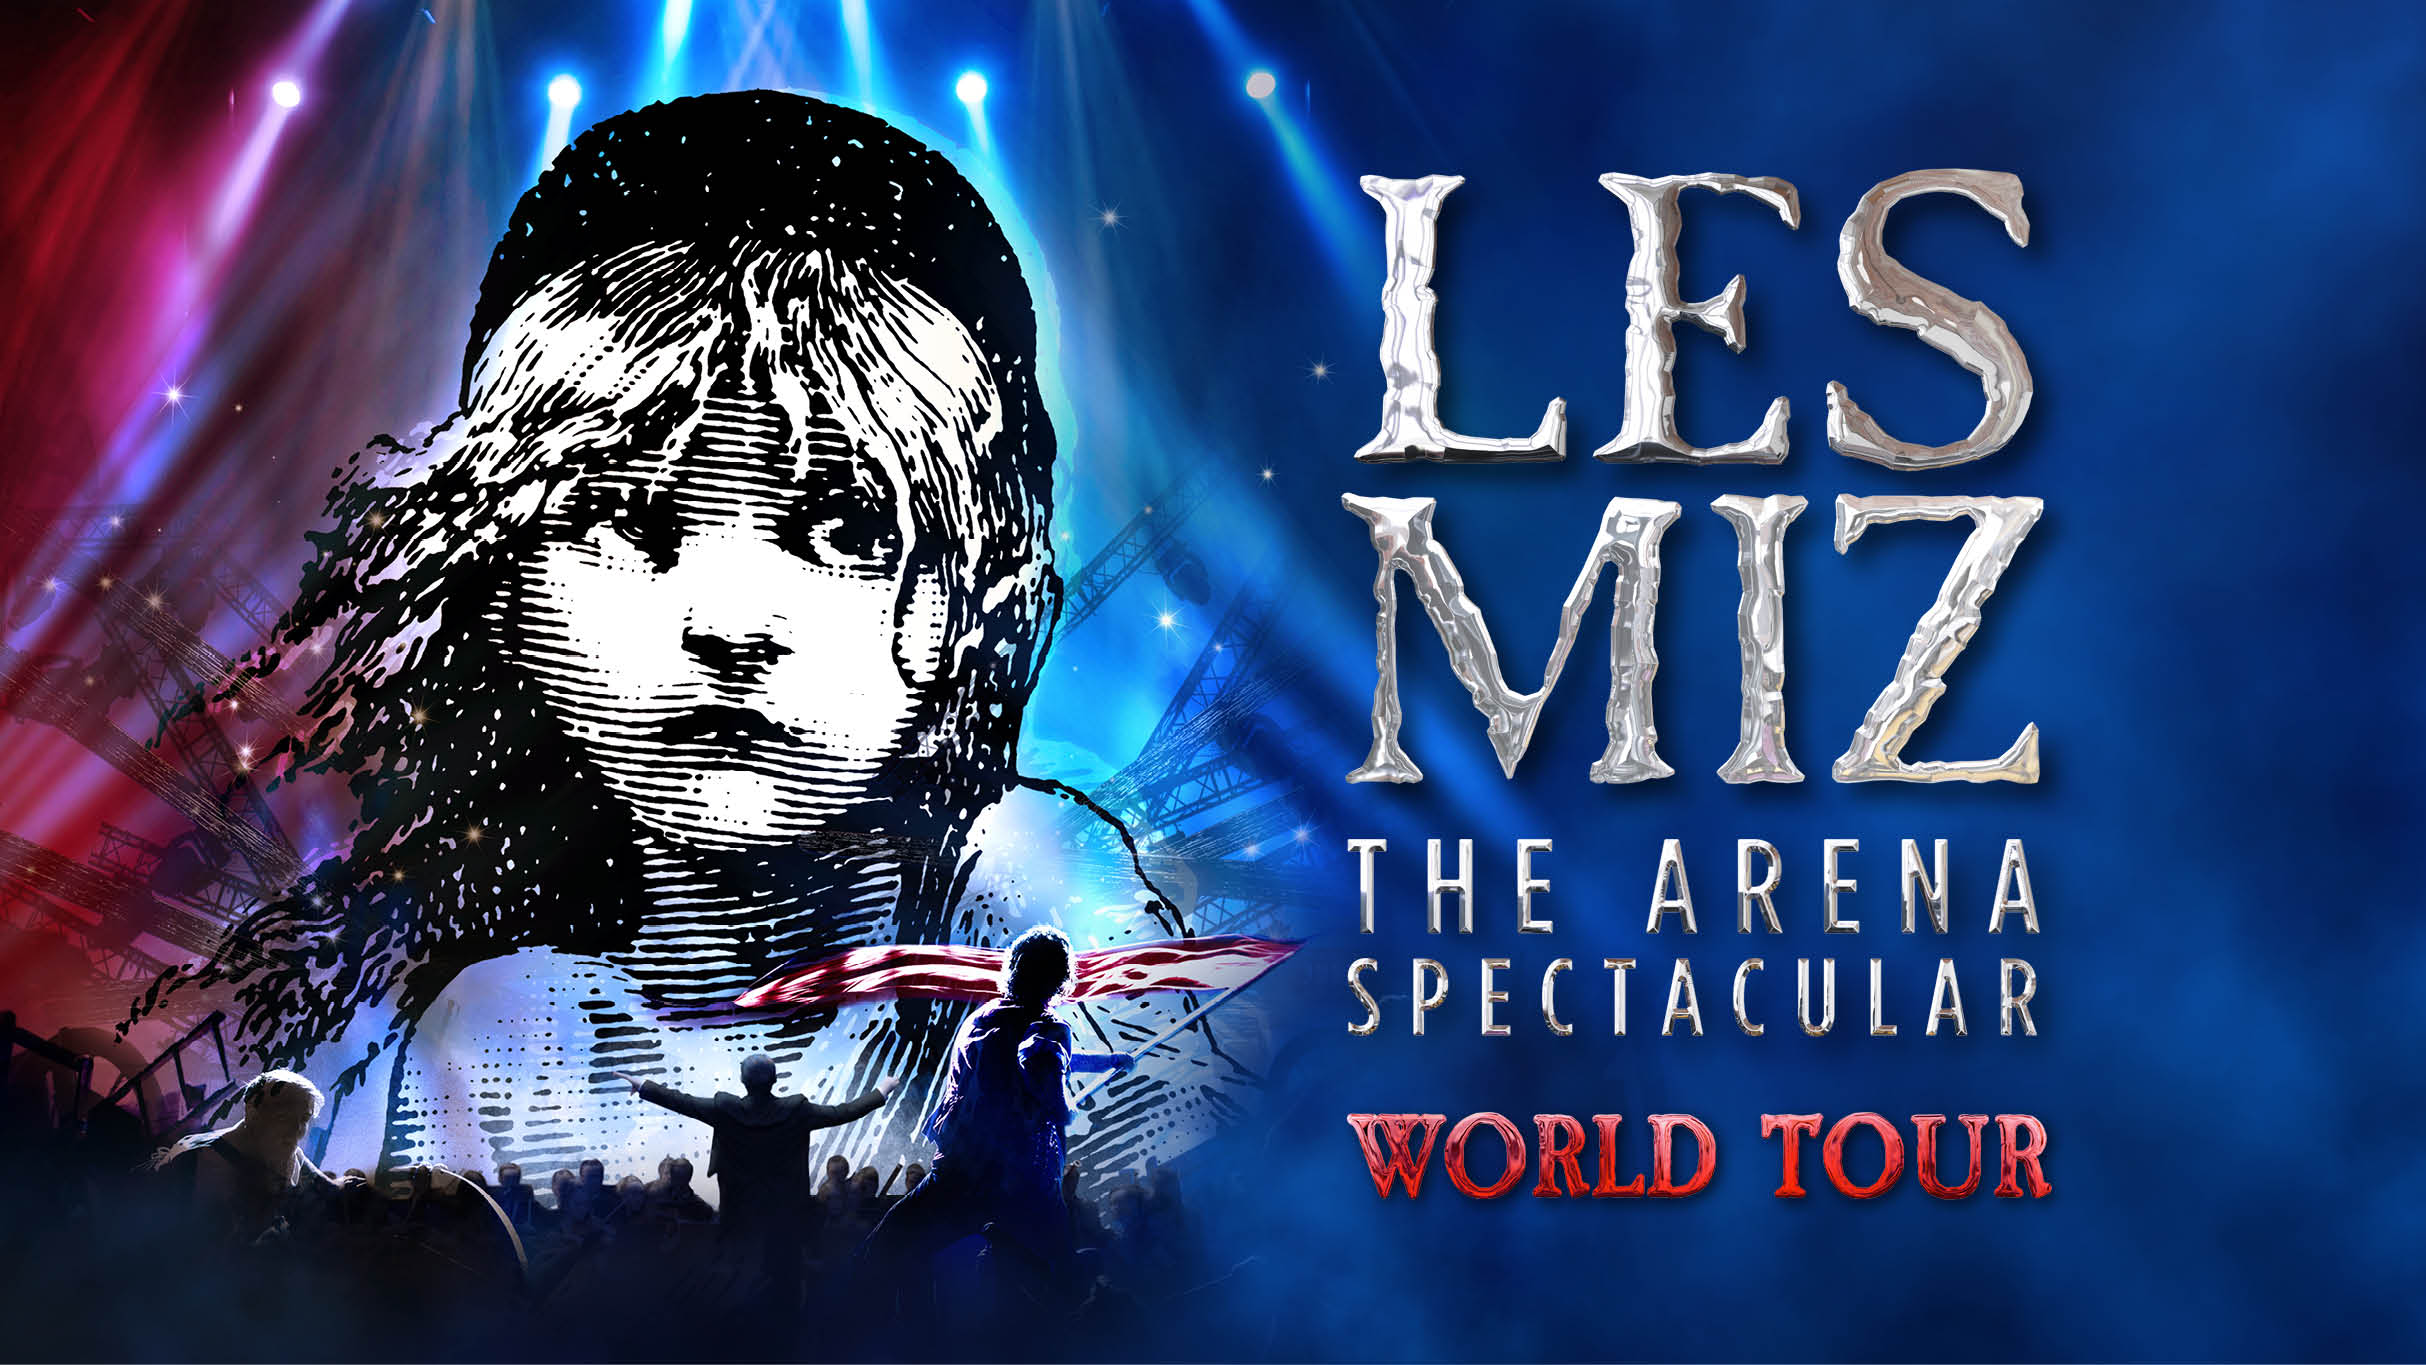 Image name Les Miserables The Arena Spectacular at Utilita Arena Sheffield Sheffield the 1 image from the post Les Miserables: The Arena Spectacular at Utilita Arena Sheffield, Sheffield in Yorkshire.com.